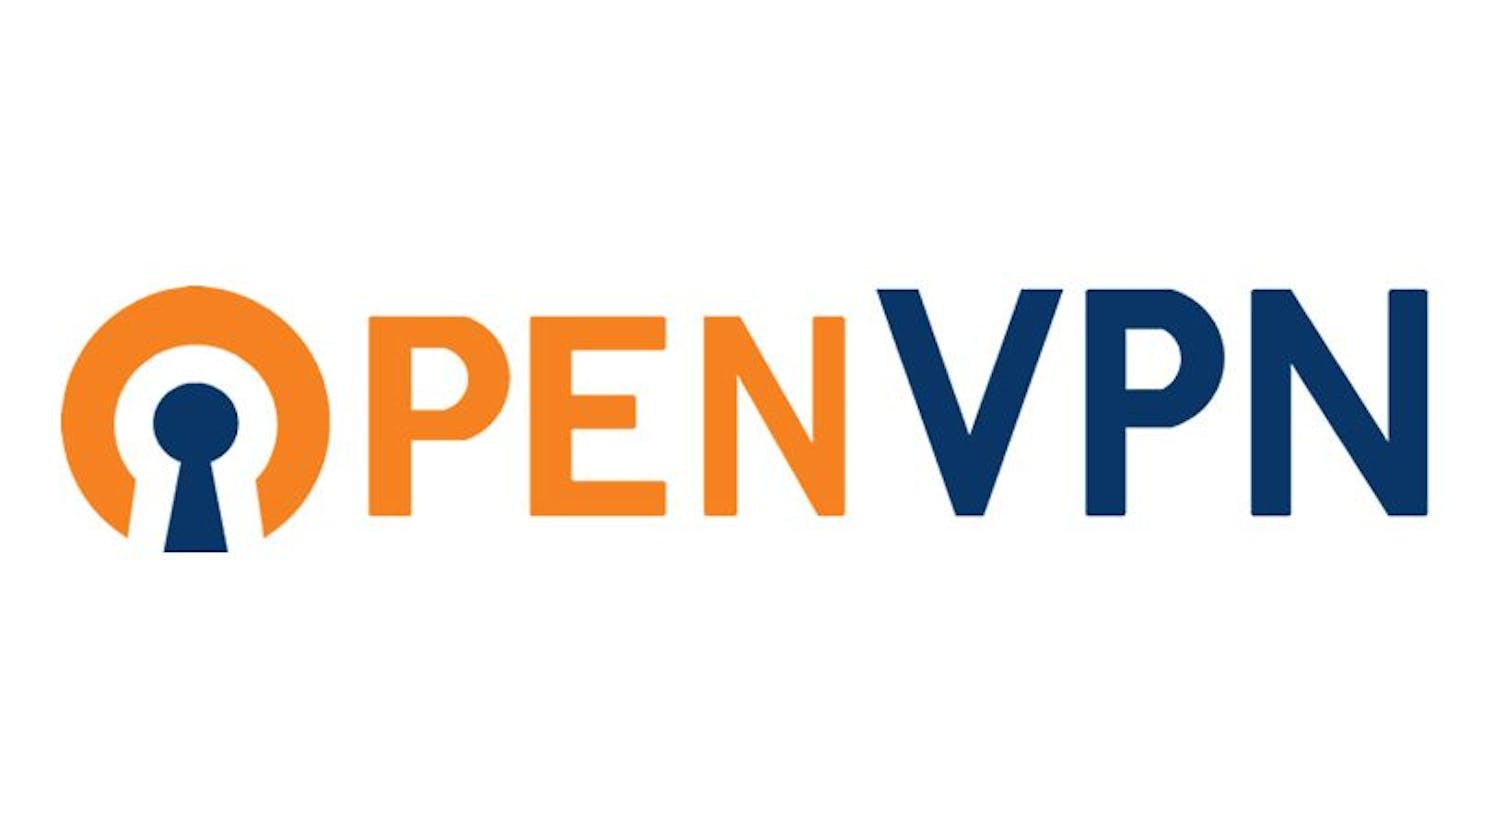 How to Secure Your Internet Connection with OpenVPN on Linux